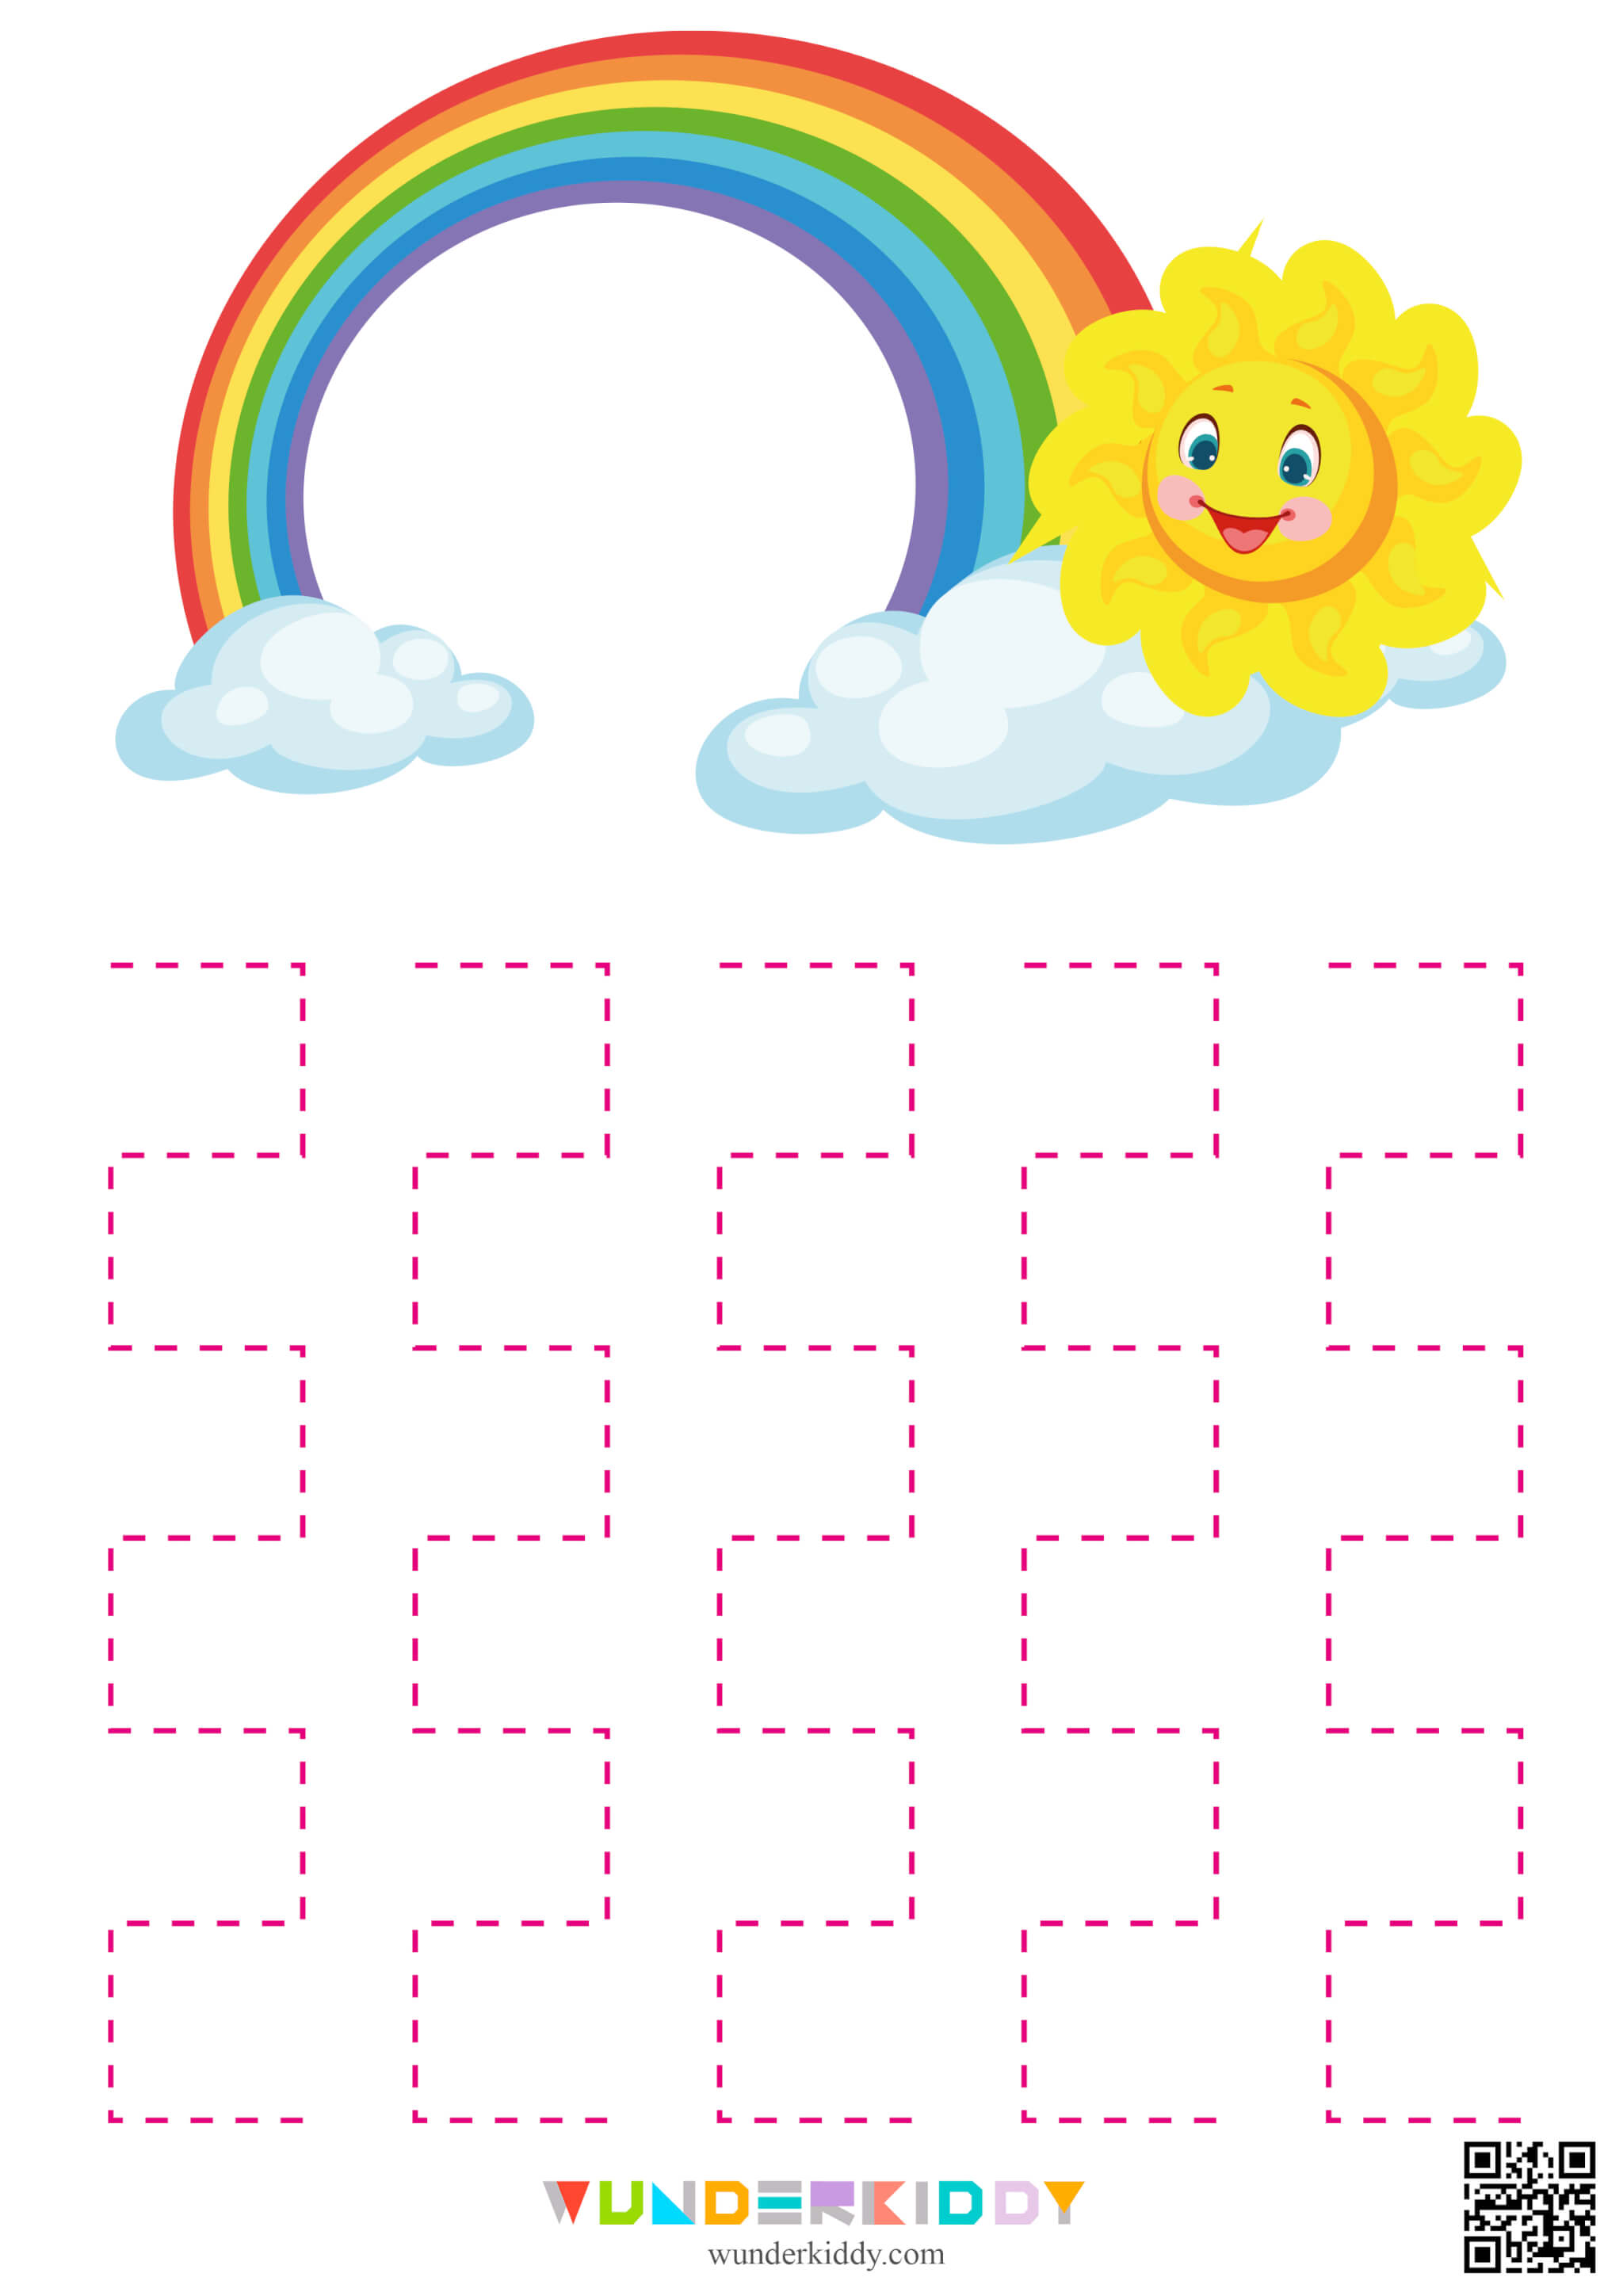 Worksheet for Pre-writing Practice Sun and Rainbow - Image 7